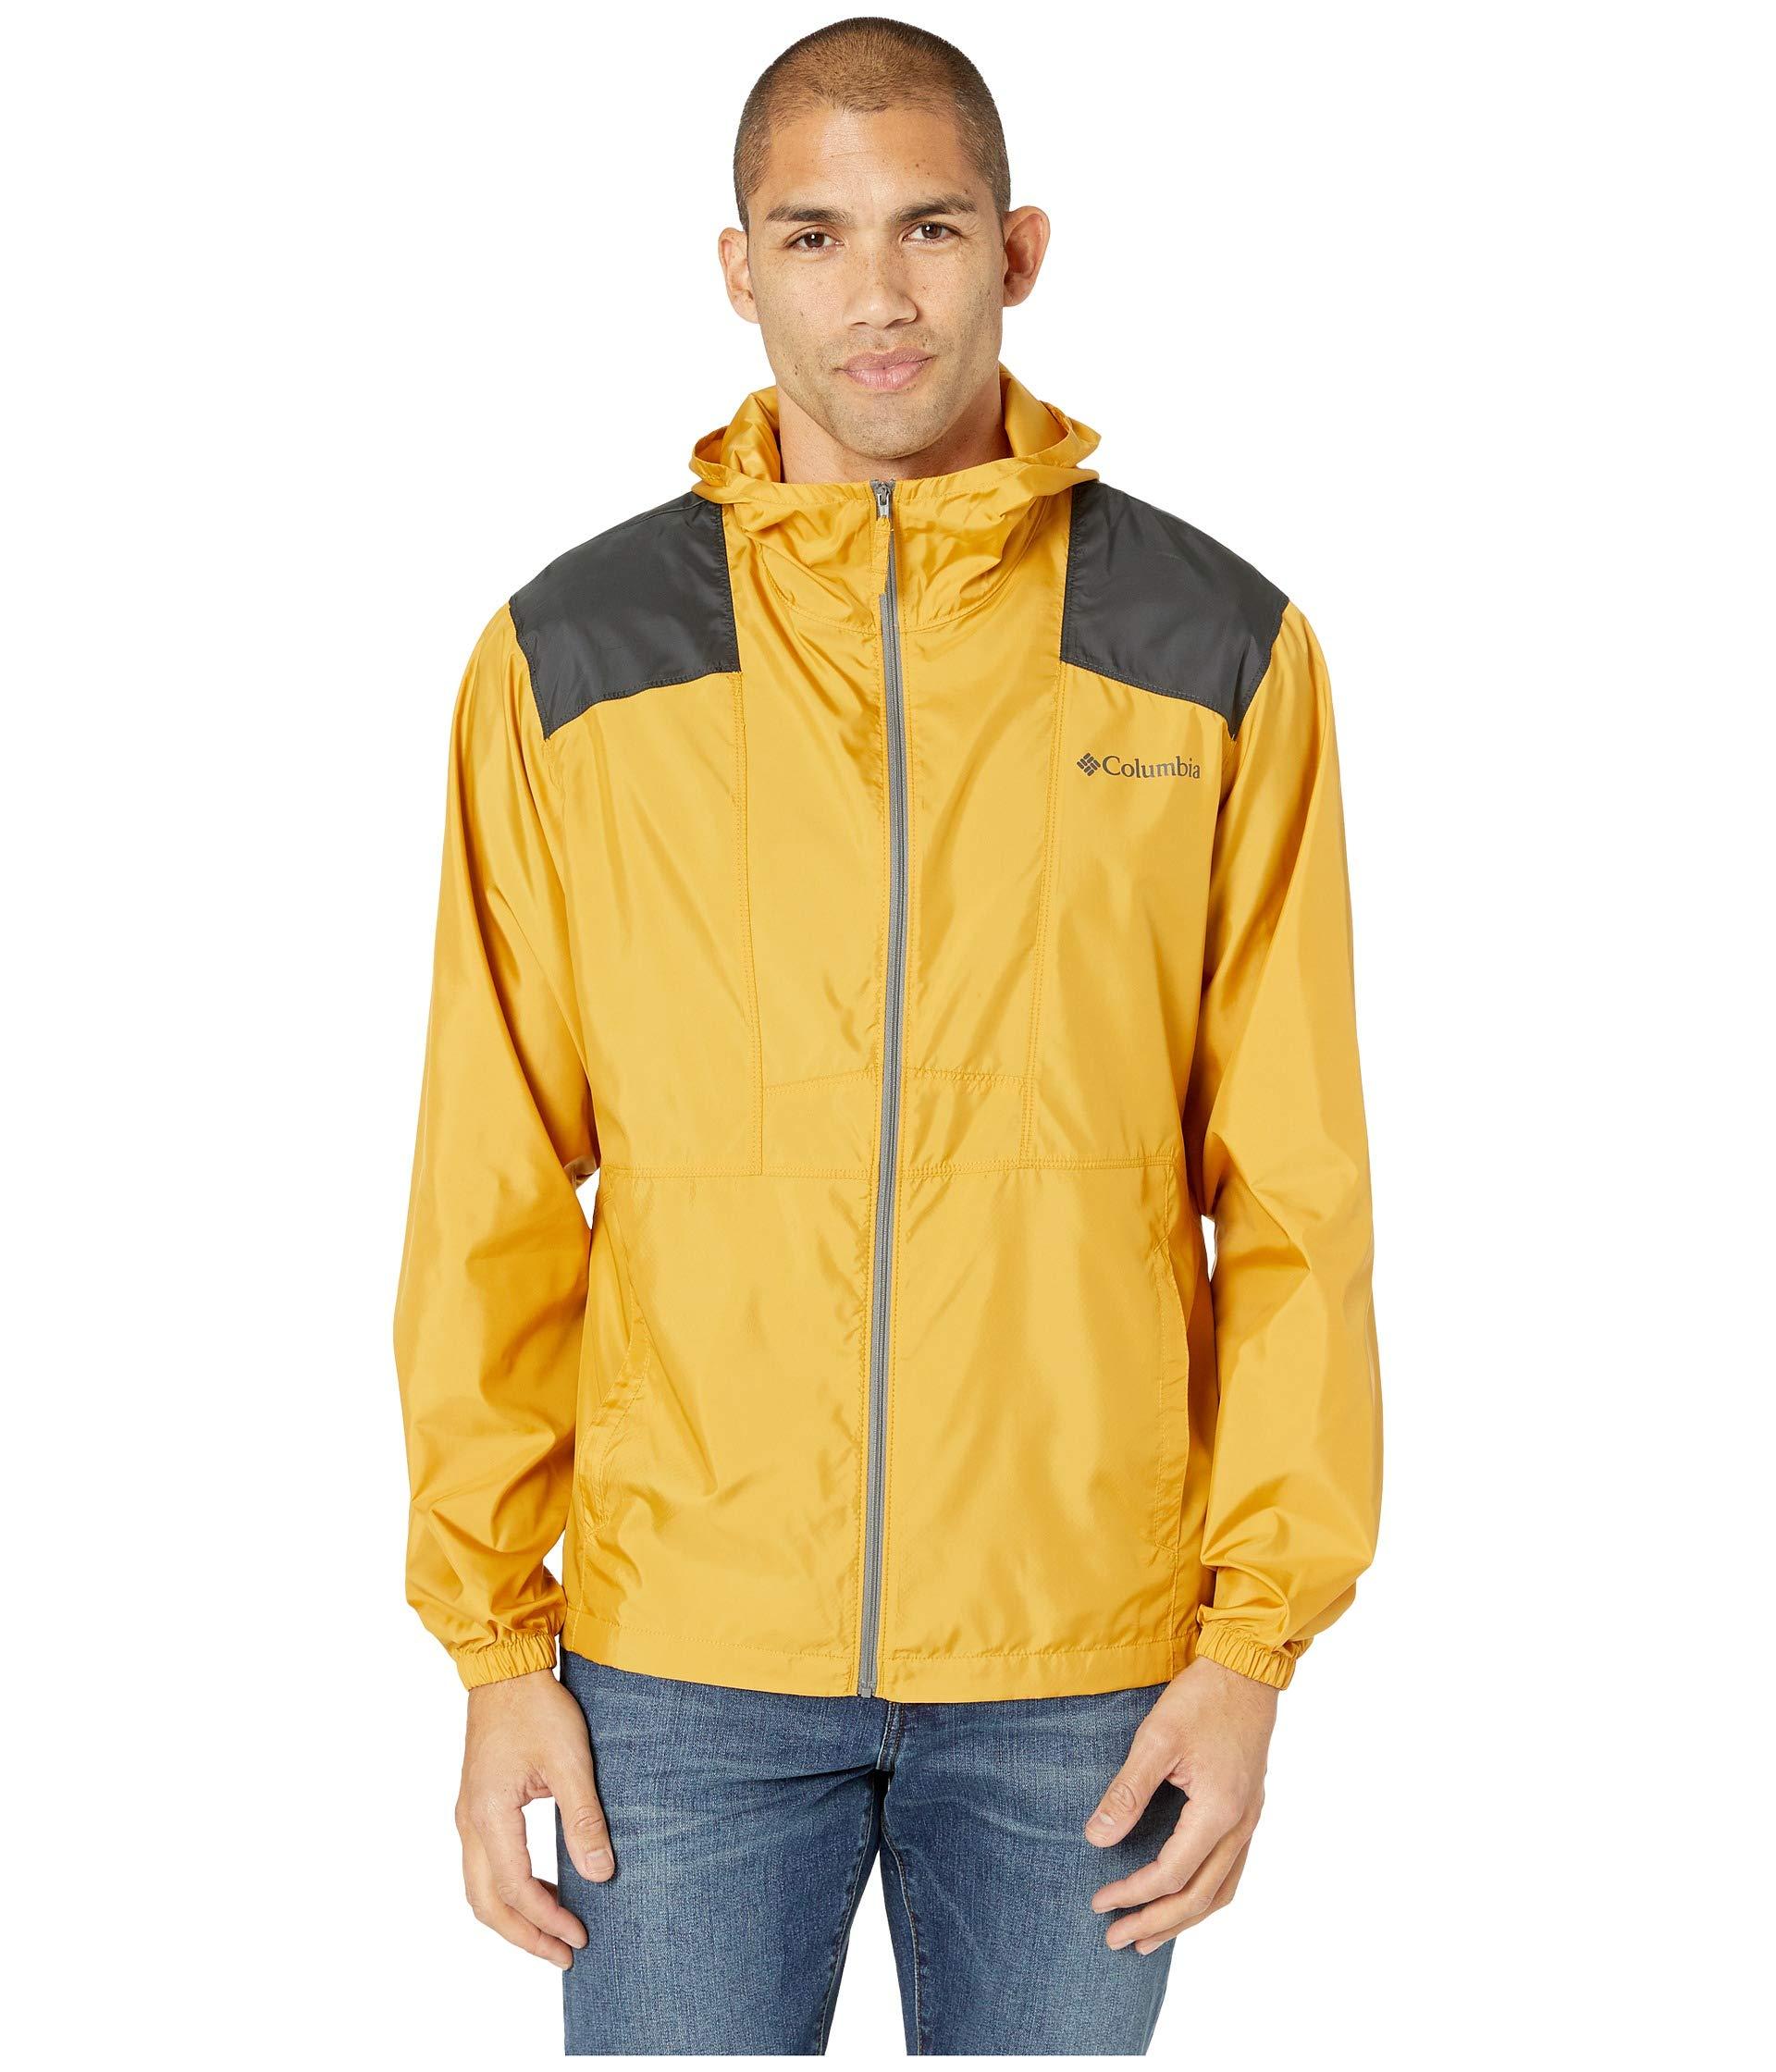 Columbia Flashbacktm Windbreaker in Yellow for Men - Save 26% - Lyst